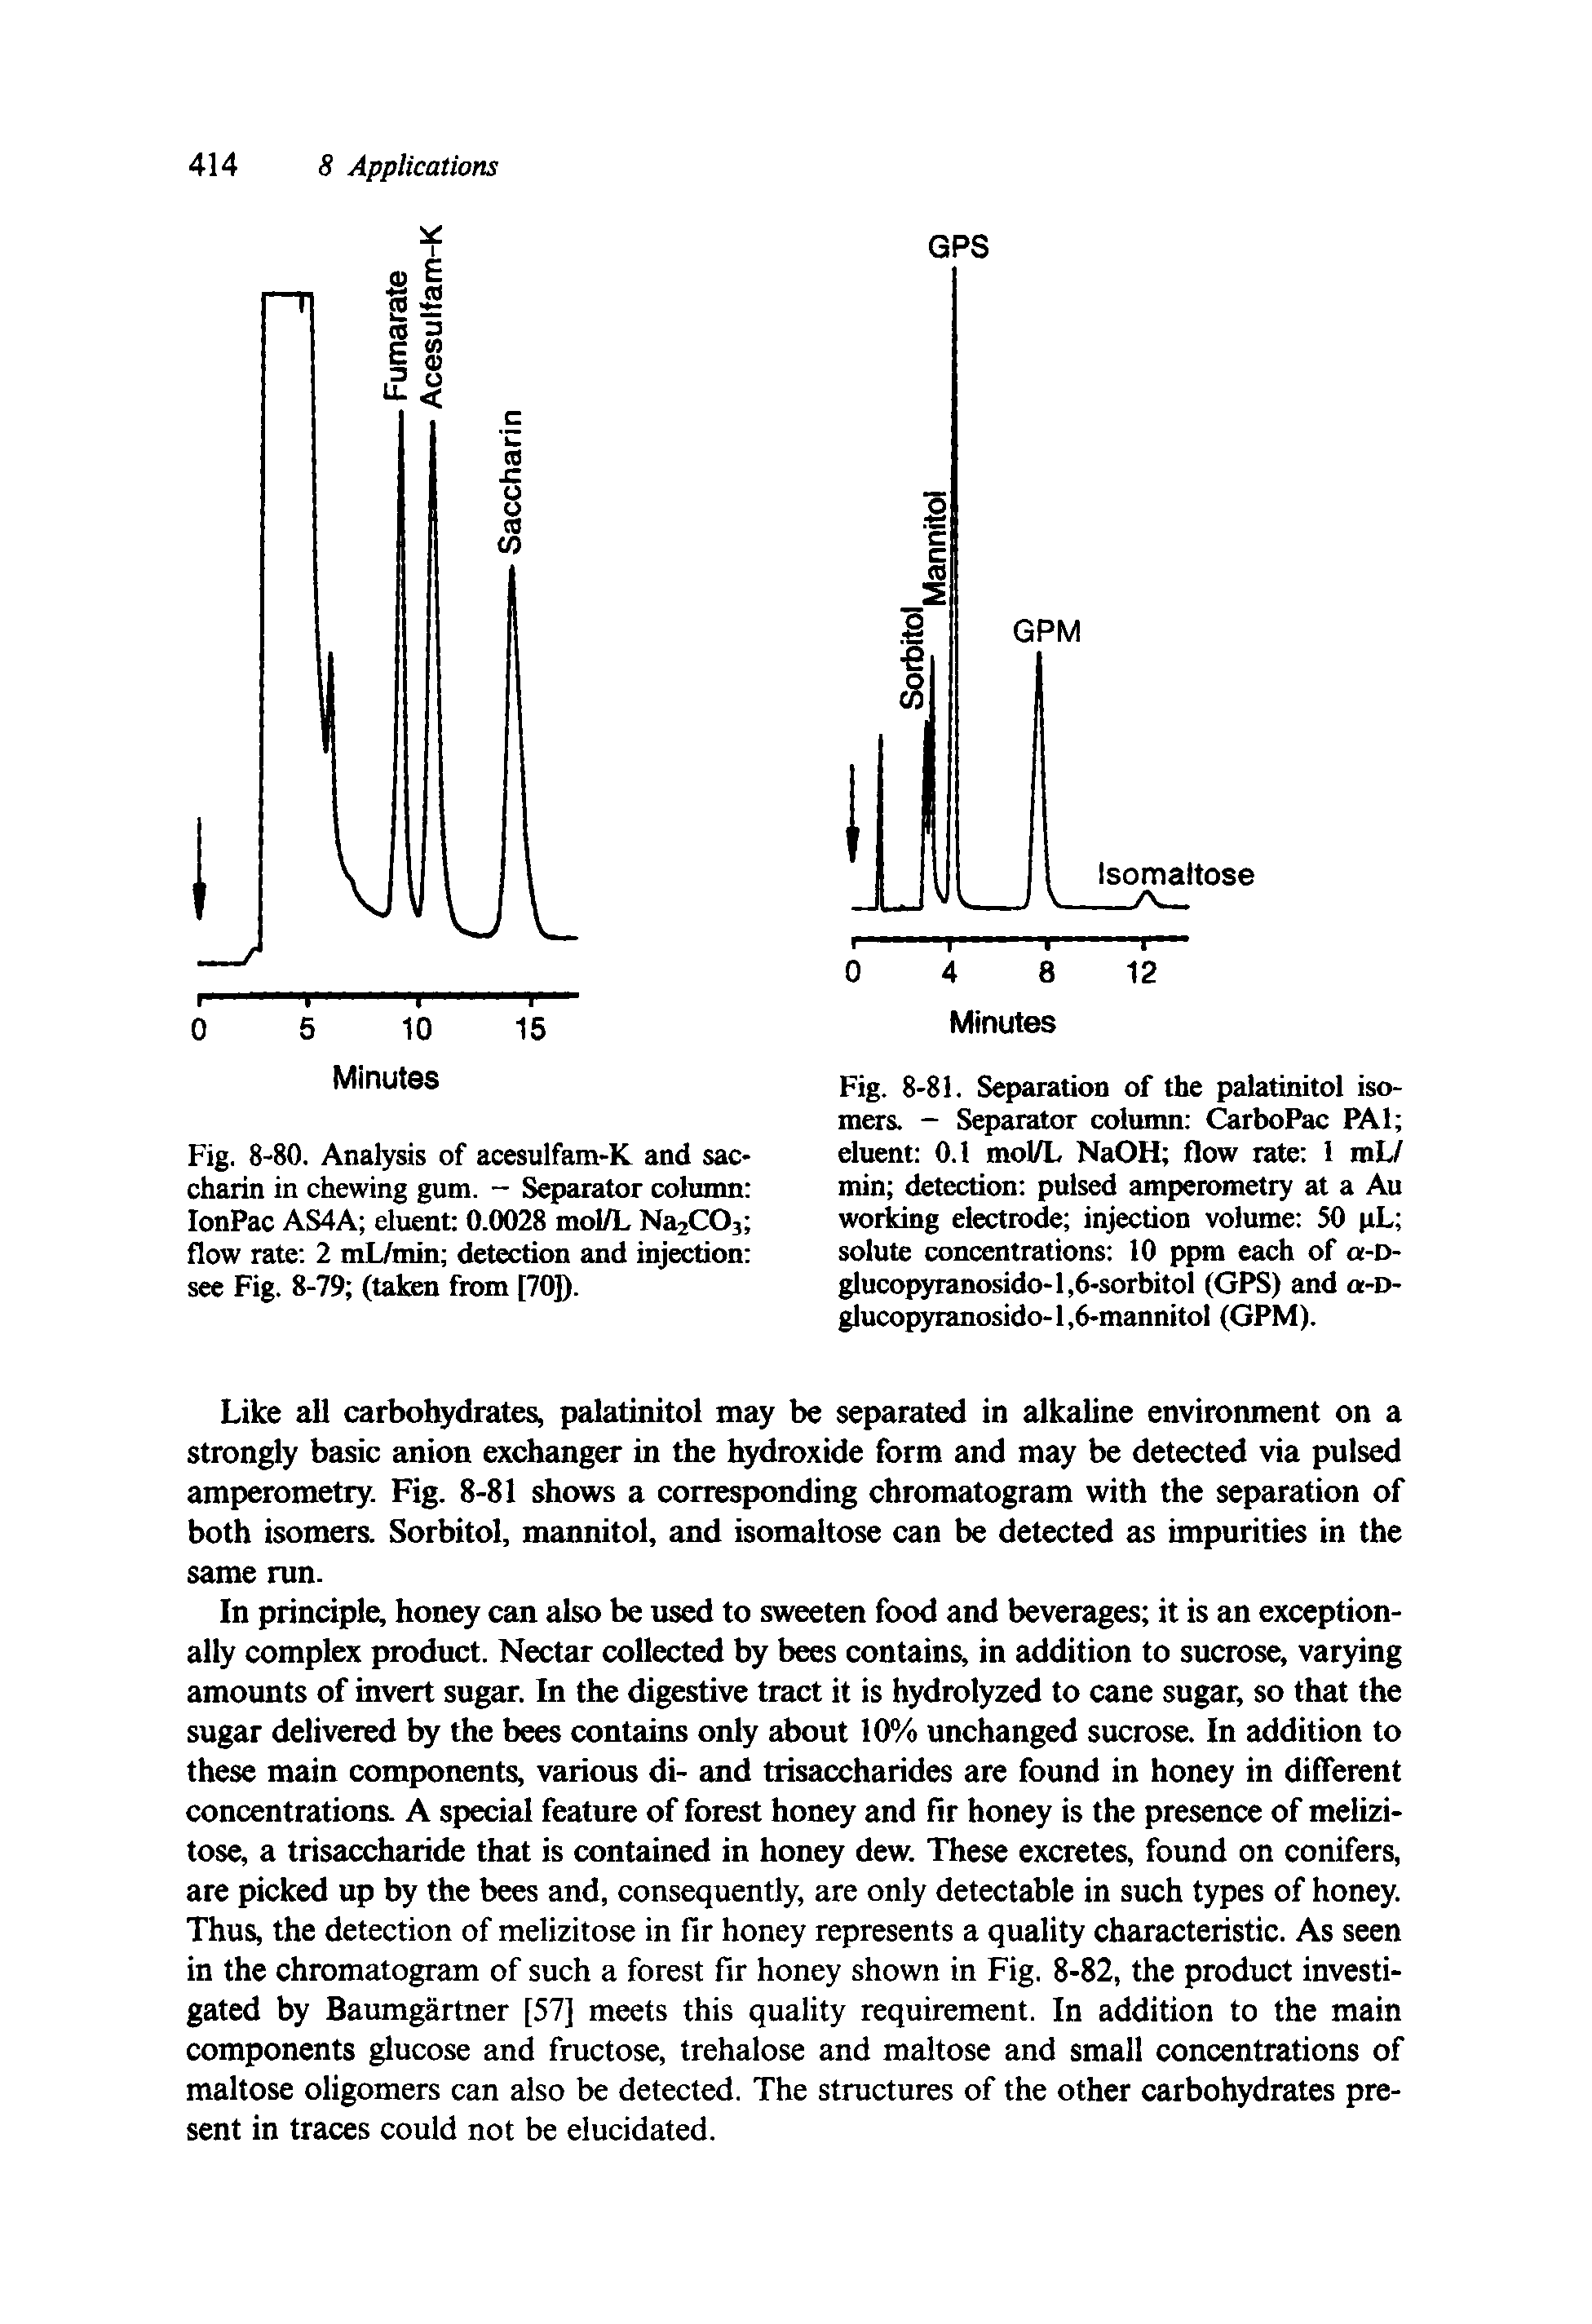 Fig. 8-80. Analysis of acesulfam-K and saccharin in chewing gum. - Separator column IonPac AS4A eluent 0.0028 mol/L Na2C03 flow rate 2 mL/min detection and injection see Fig. 8-79 (taken from [70]).